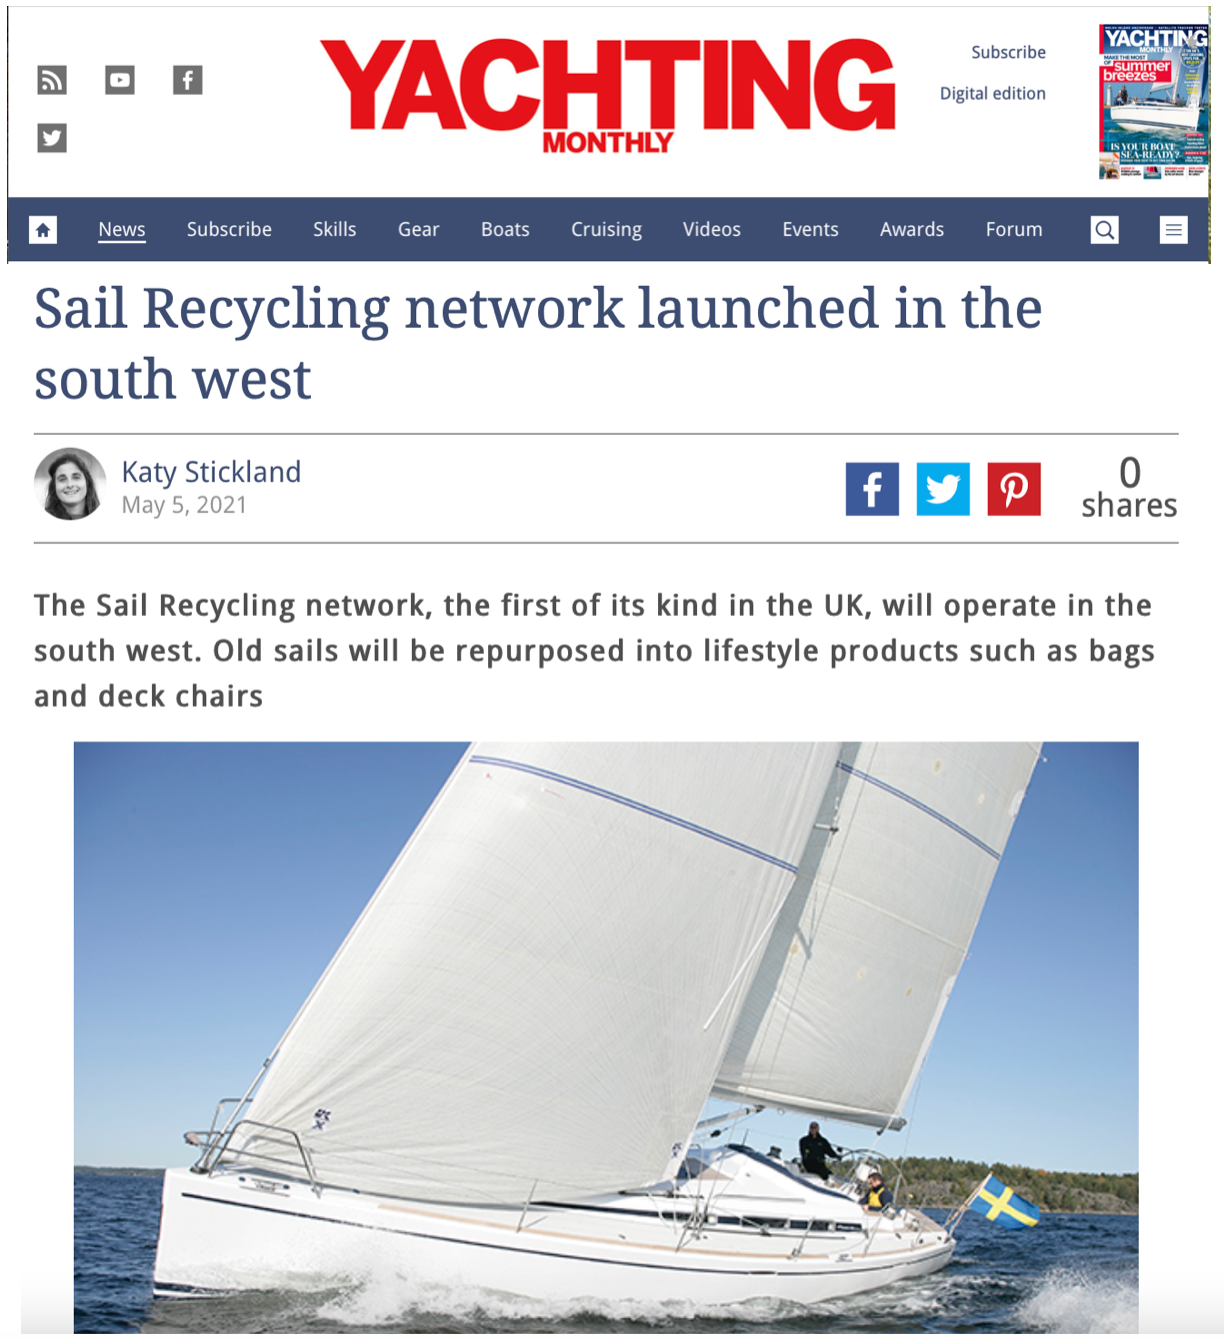 Yachting Monthly covers launch of Clean Sailors' Sail Recycling Network